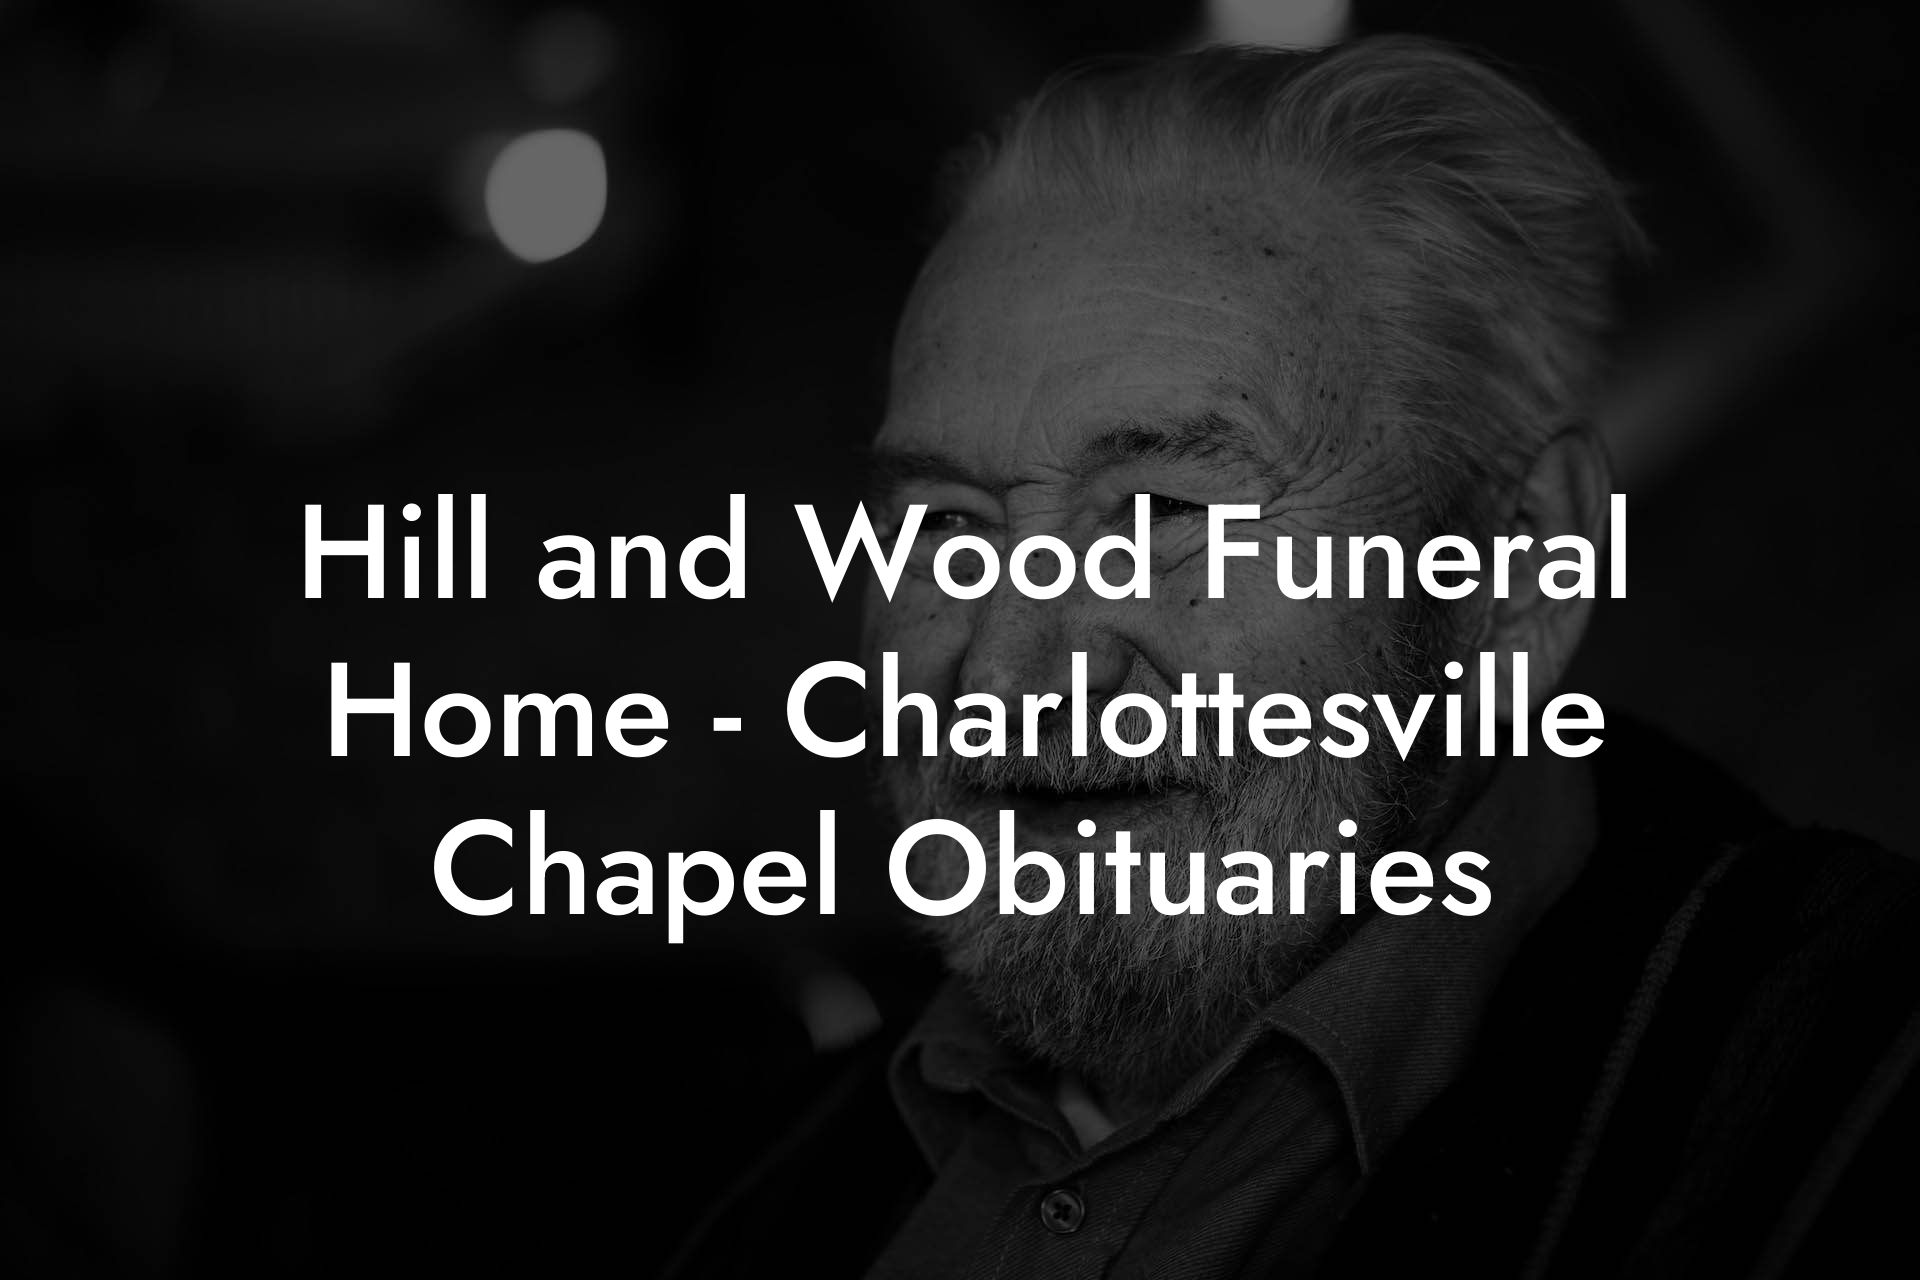 Hill and Wood Funeral Home - Charlottesville Chapel Obituaries